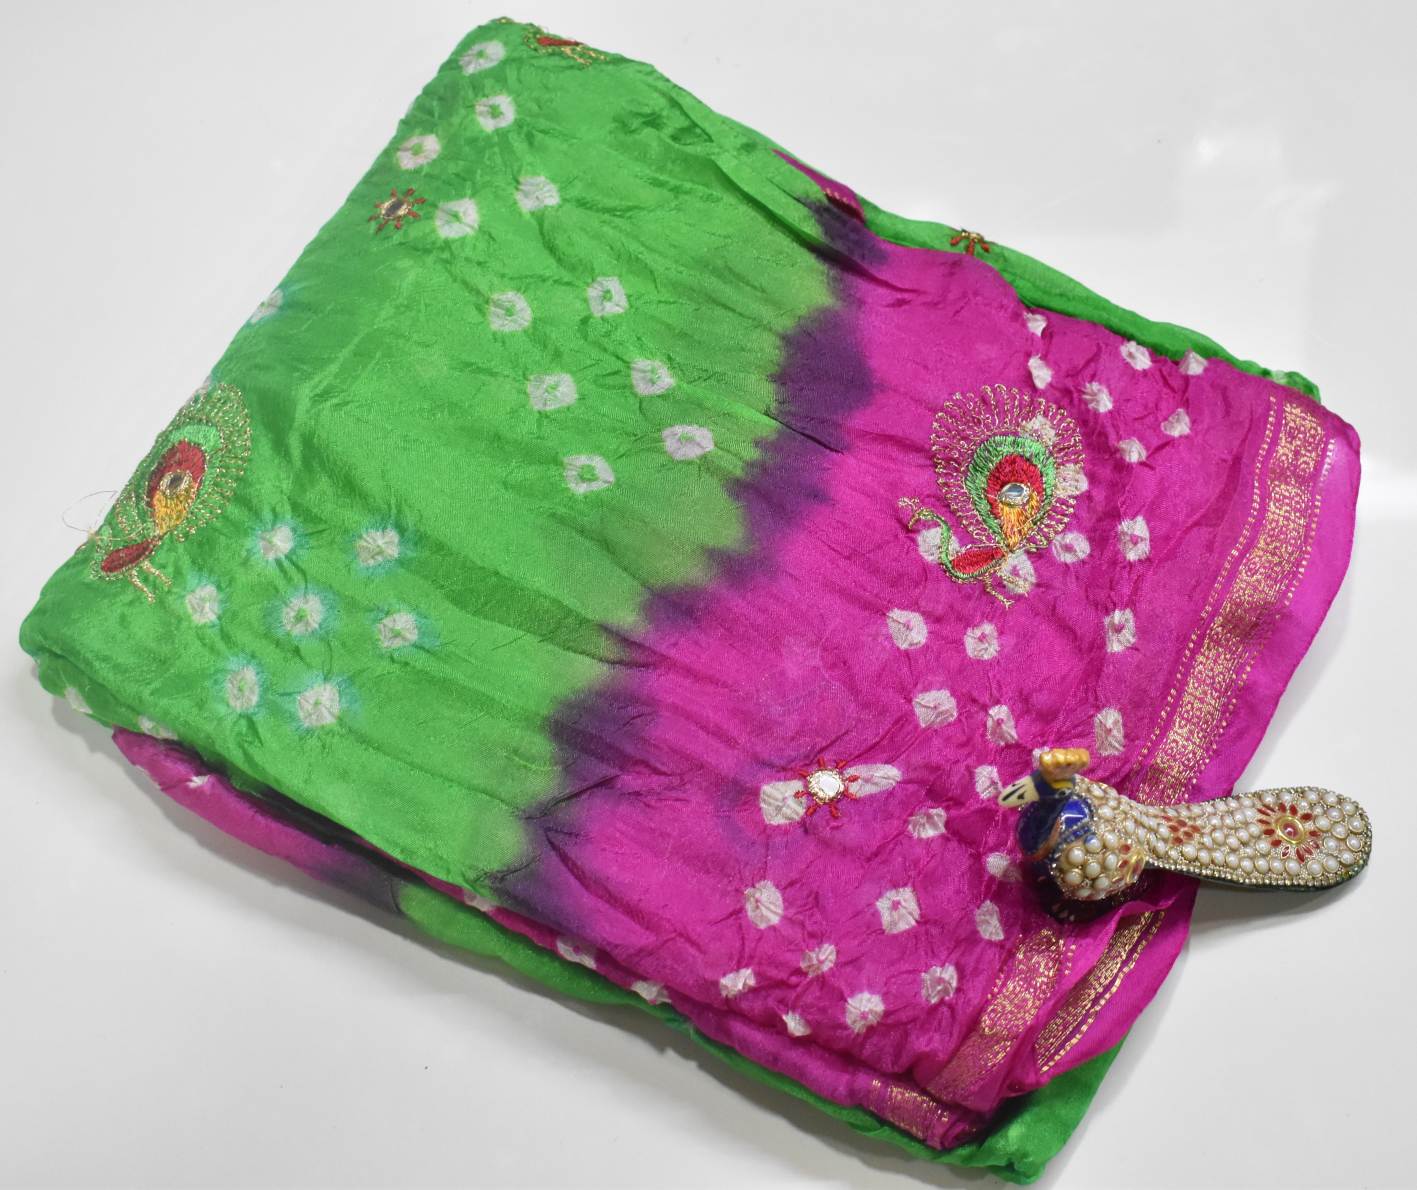 Jaipur Bandhani Saree in leaf green body color with pink border